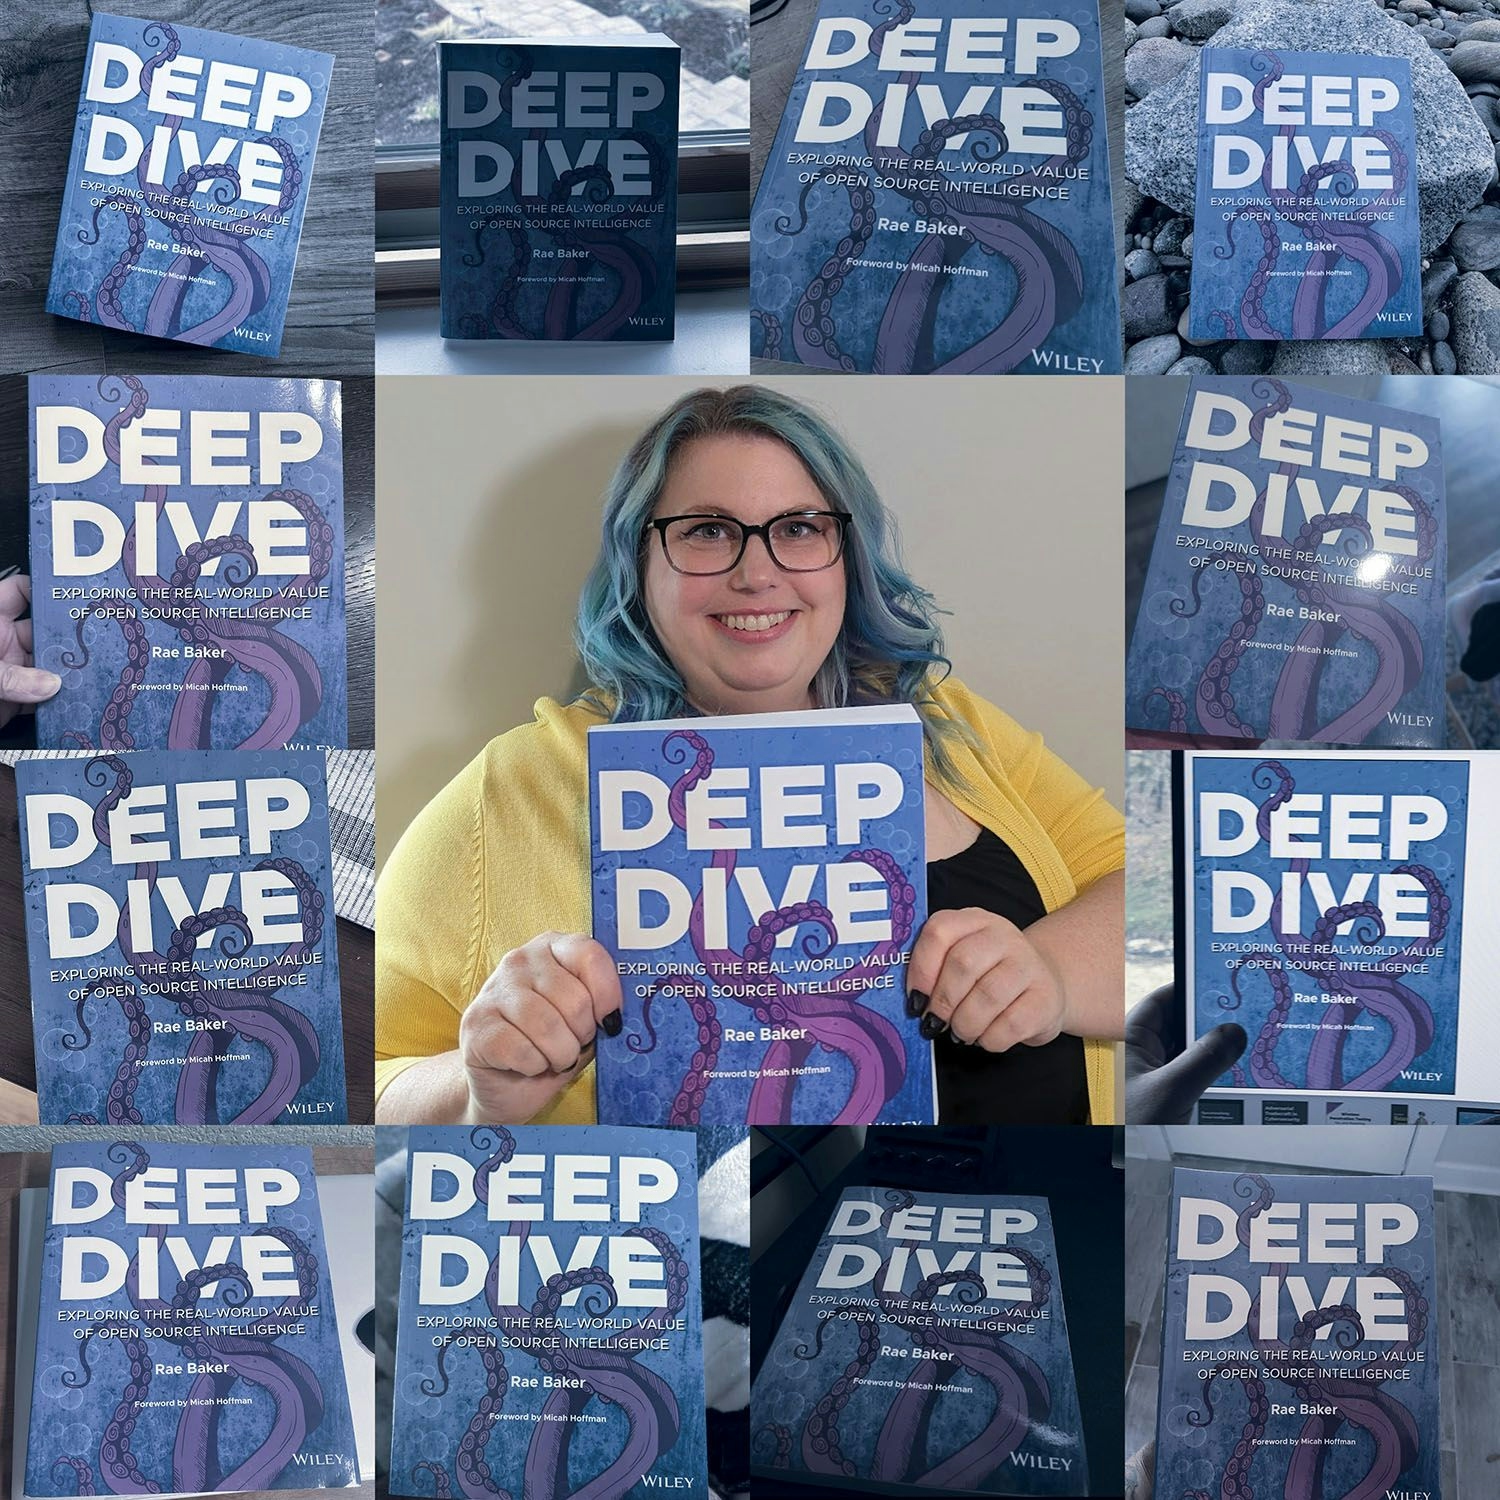 Rae and her book Deep dive